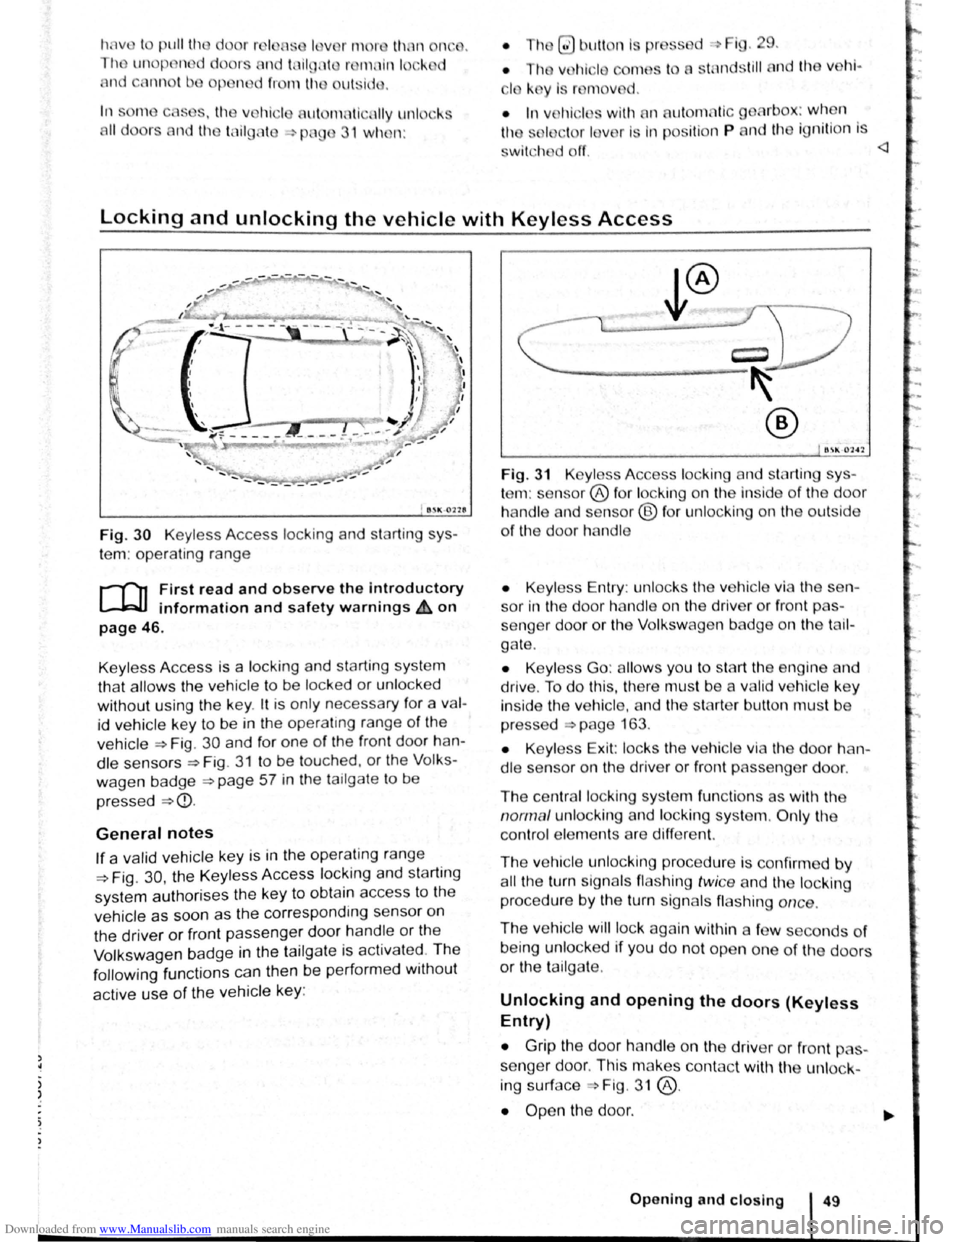 VOLKSWAGEN BEETLE 2008 Owners Guide Downloaded from www.Manualslib.com manuals search engine In s m 
11 d or 
n 
d 
d =-~ i . 29. 
stA nd still nd th v hi -
•  In 
v 111 I s wit11 n ut m  tic  g  arbox : when 
v r is In p iti  n P nd 